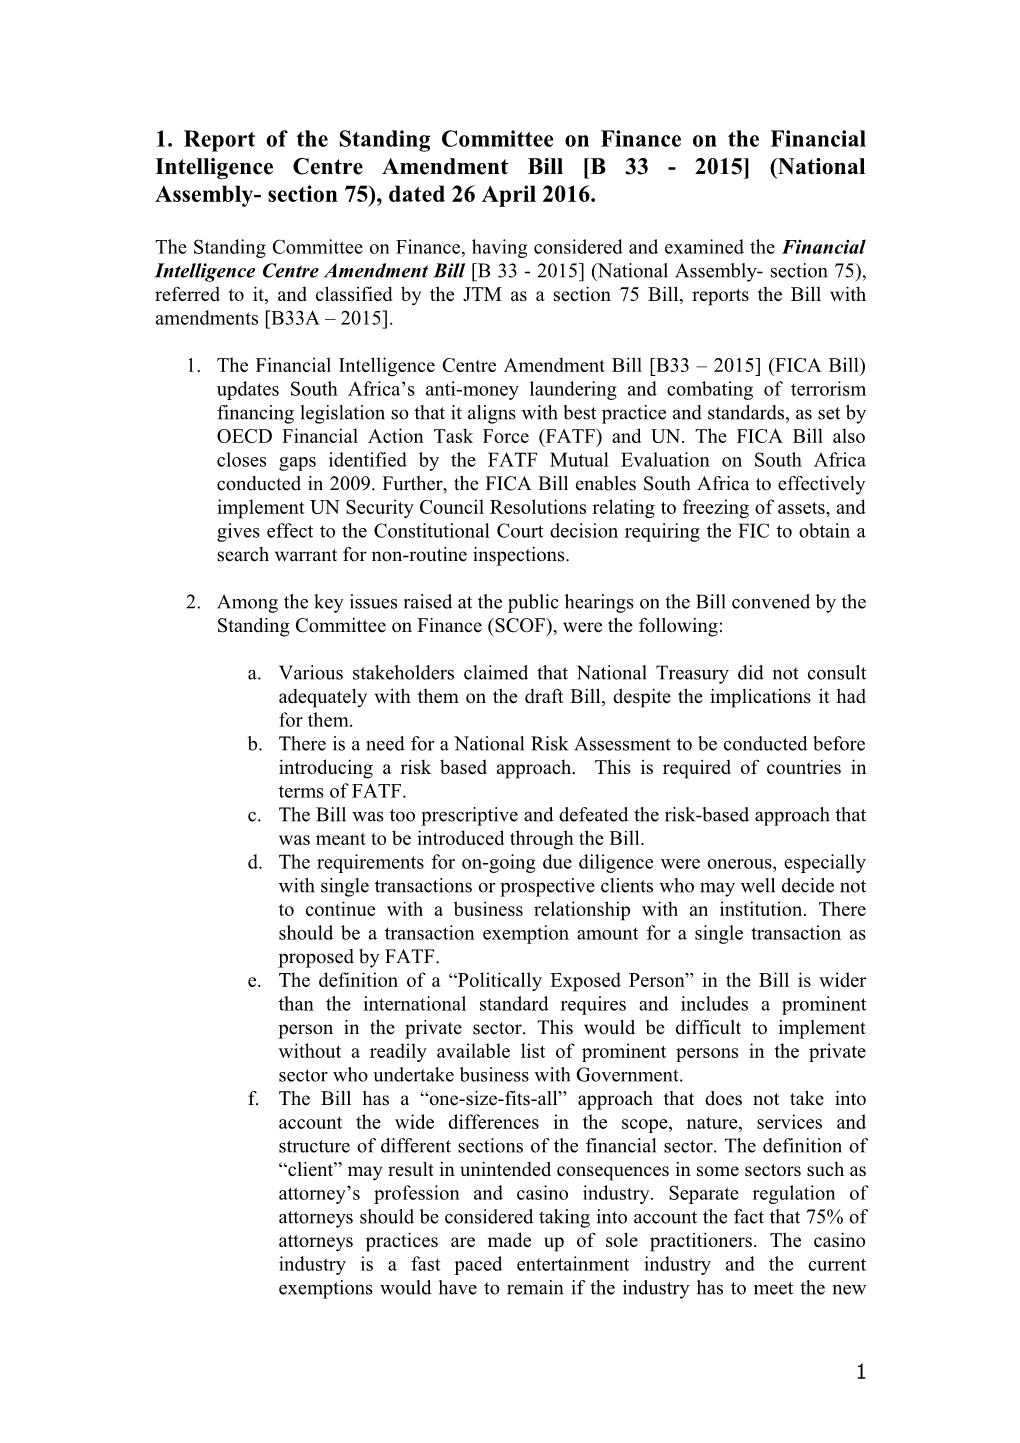 1. Report of the Standing Committee on Finance on the Financial Intelligence Centre Amendment